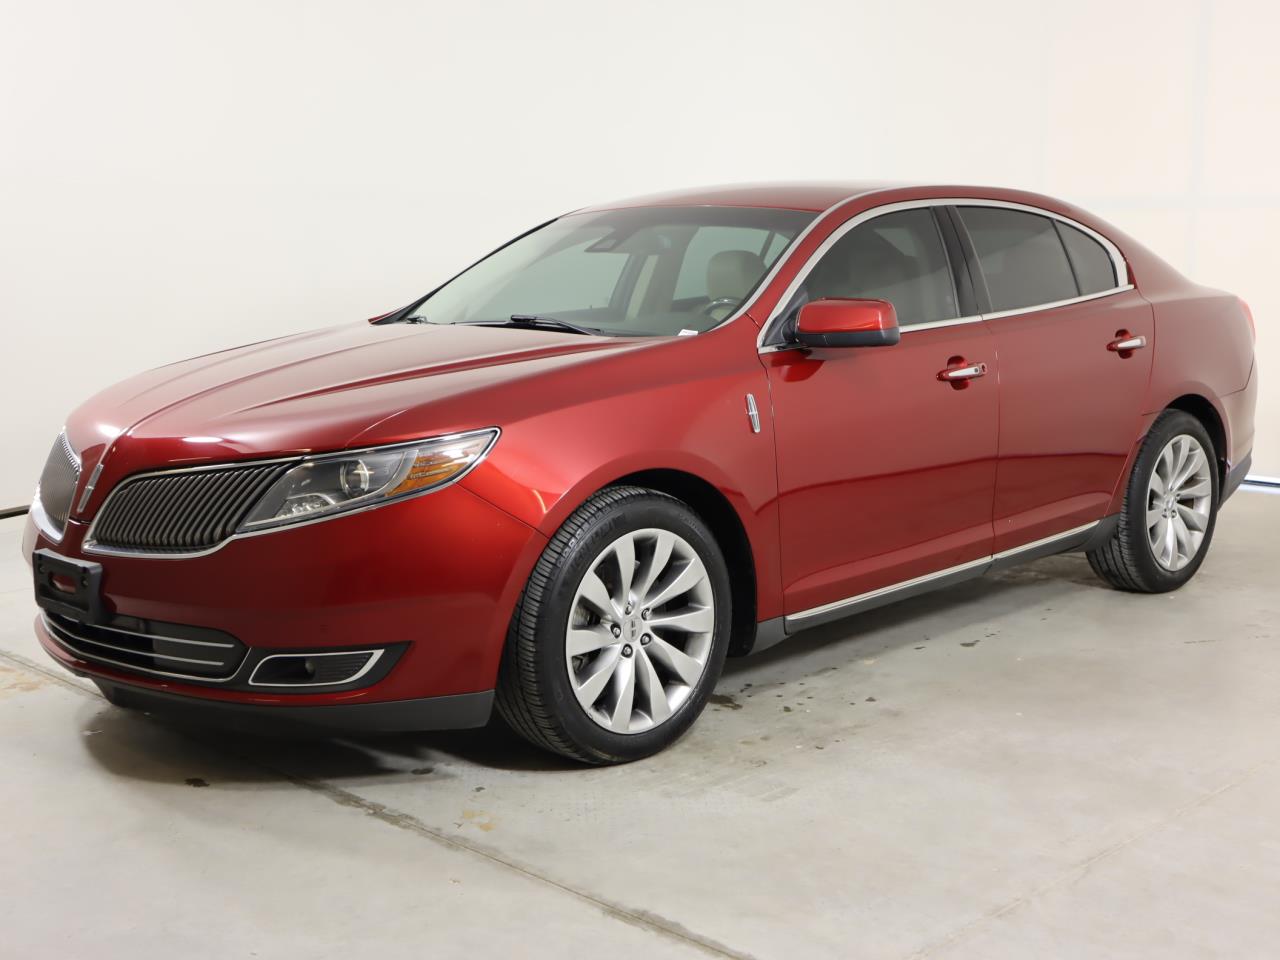 Used 2014 LINCOLN MKS for sale in SAN ANTONIO | 117571 | Carvix